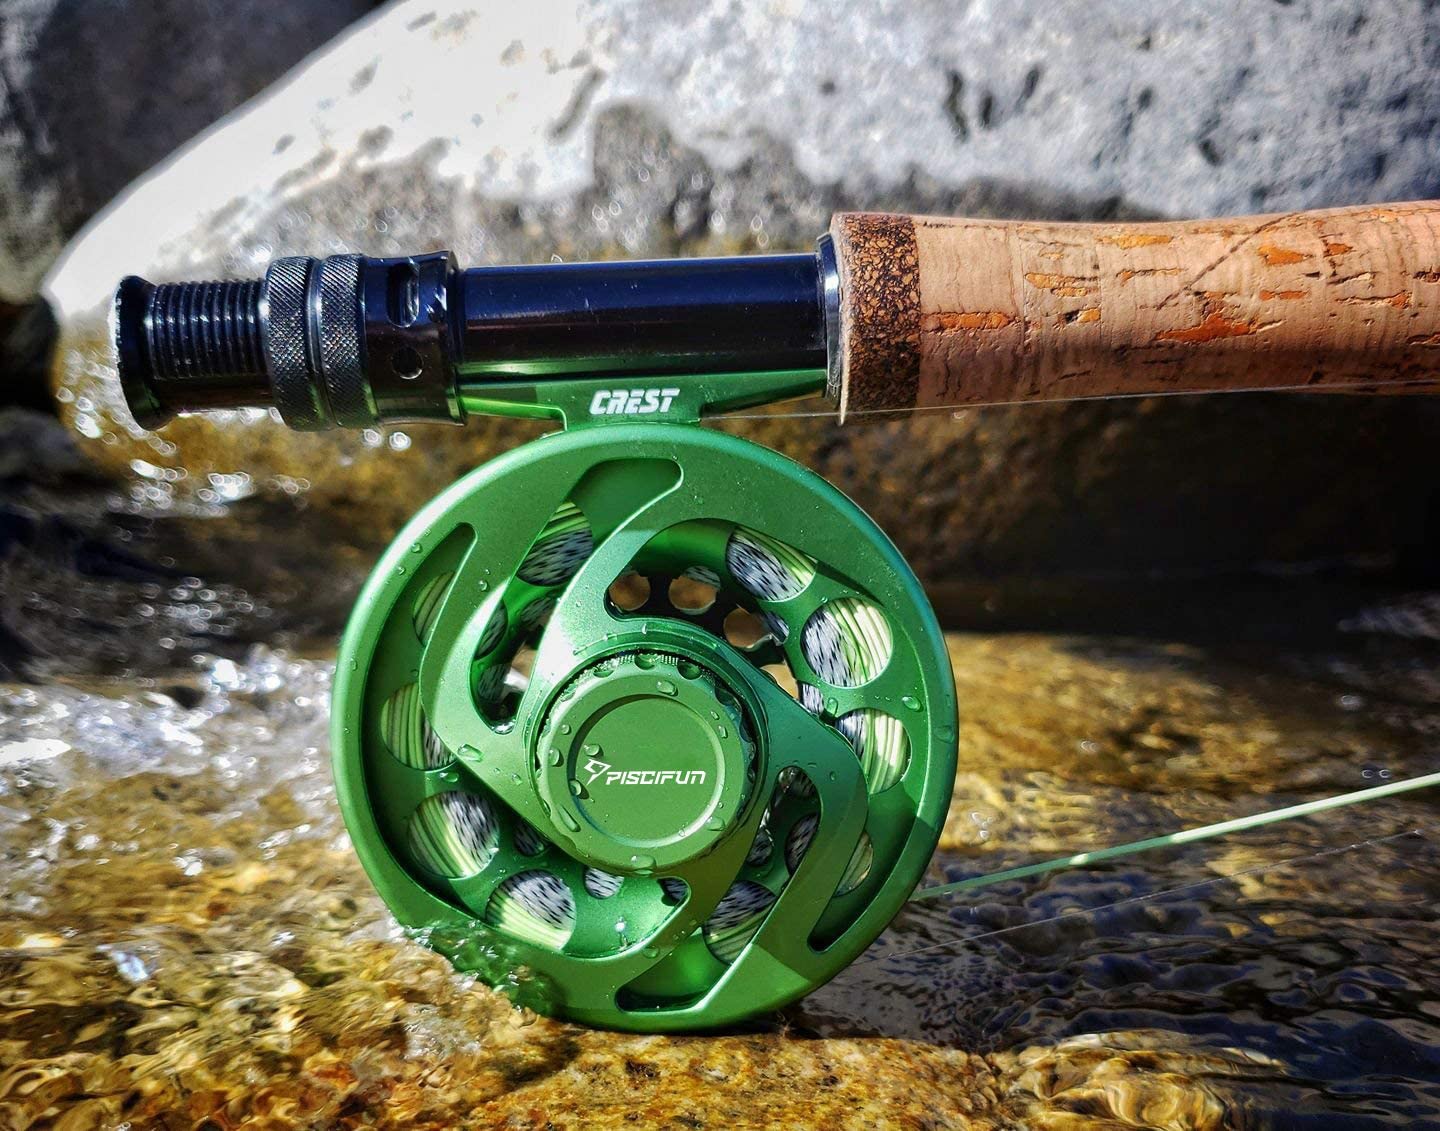 Piscifun Crest Fly Fishing Reel review